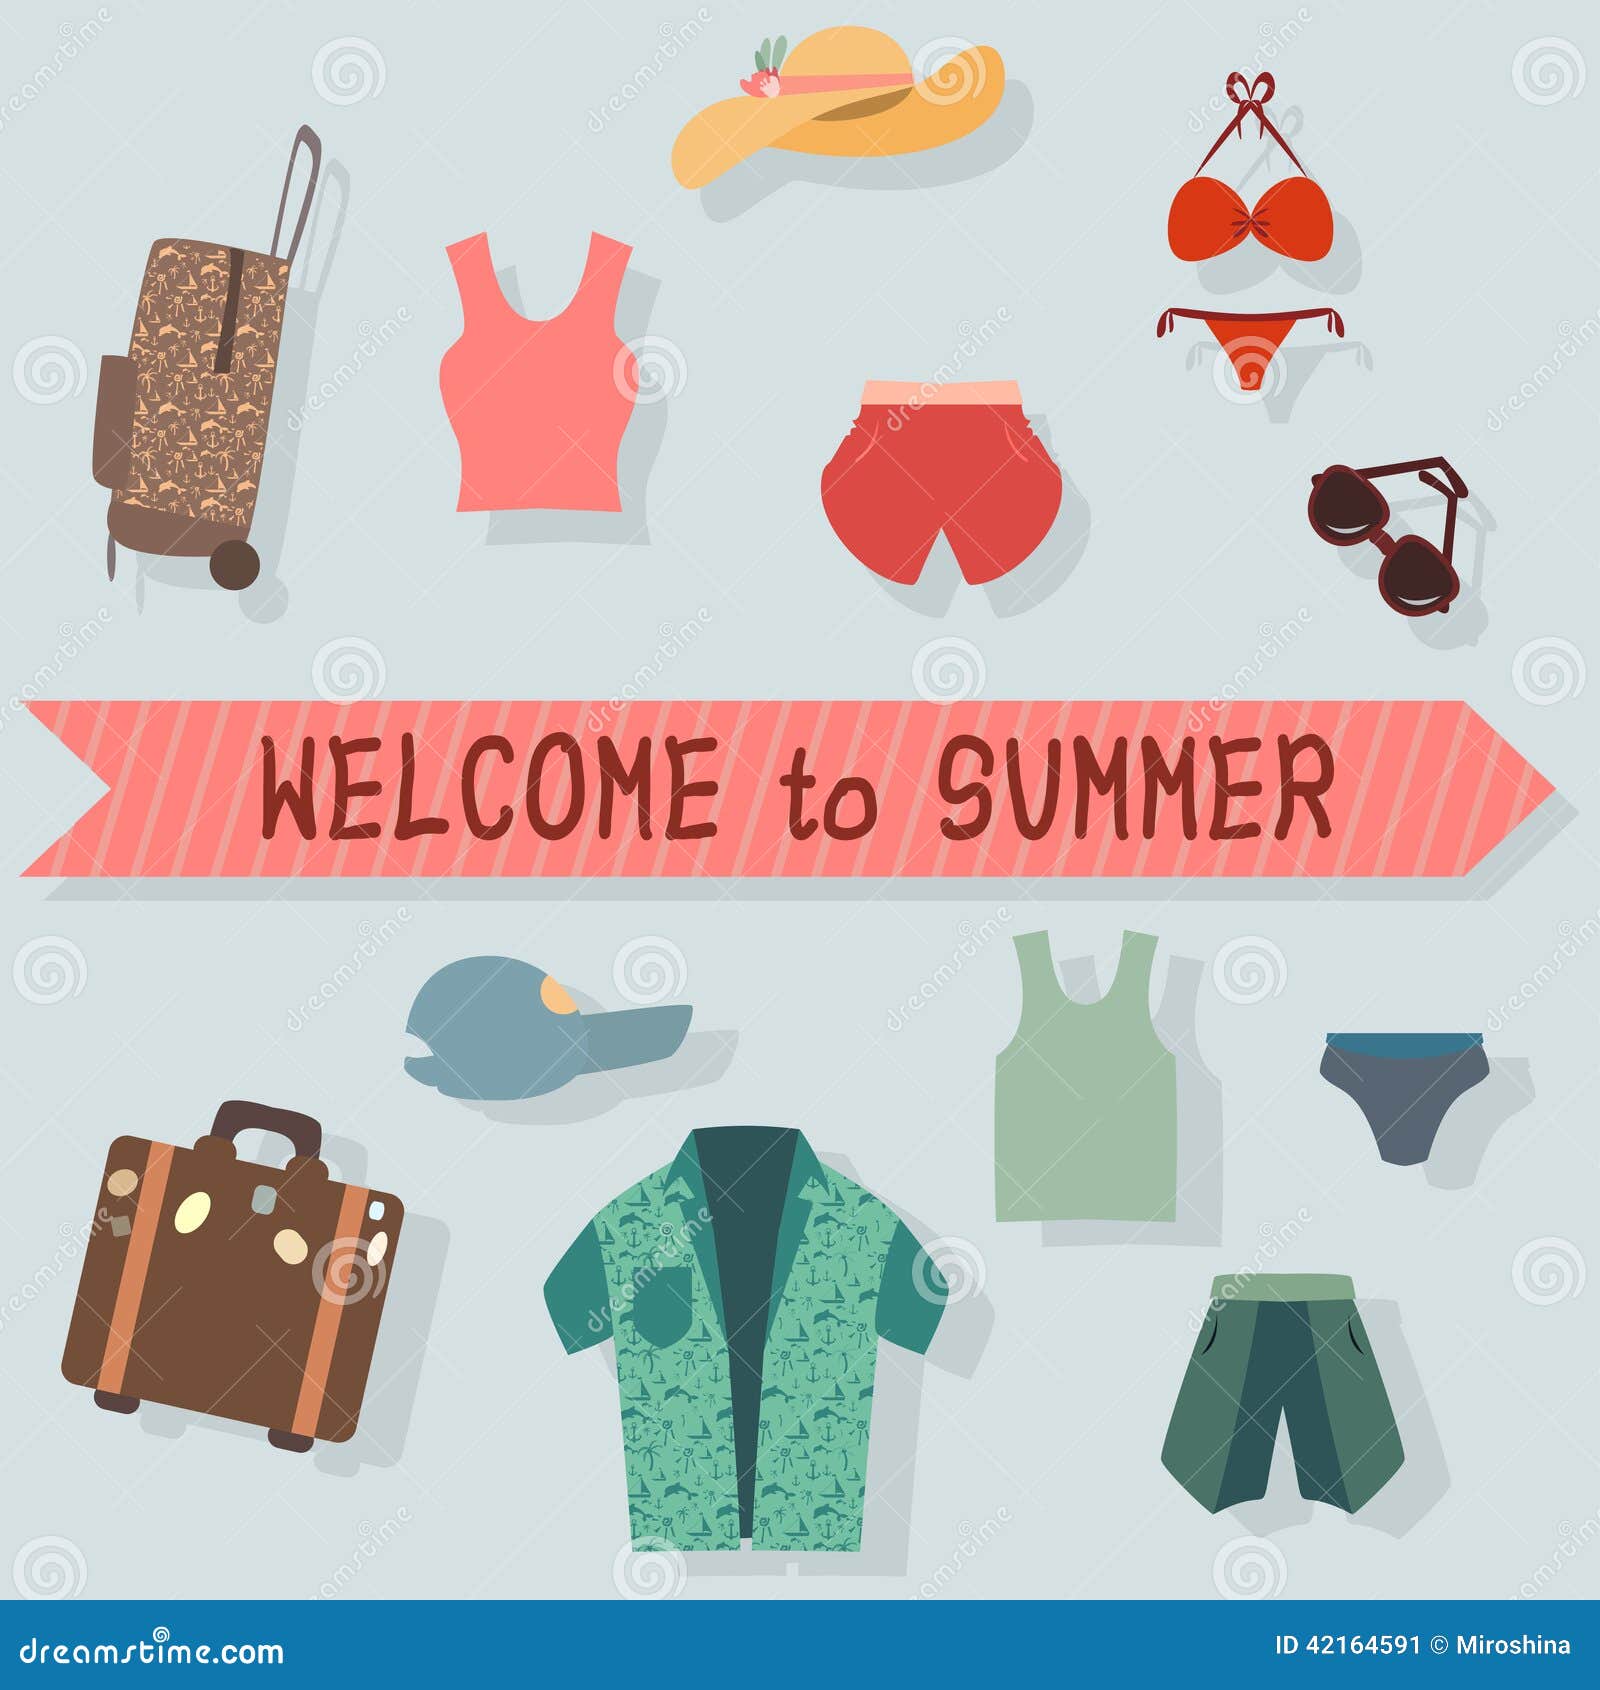 Flat Set of Beach Accessories Stock Vector - Illustration of